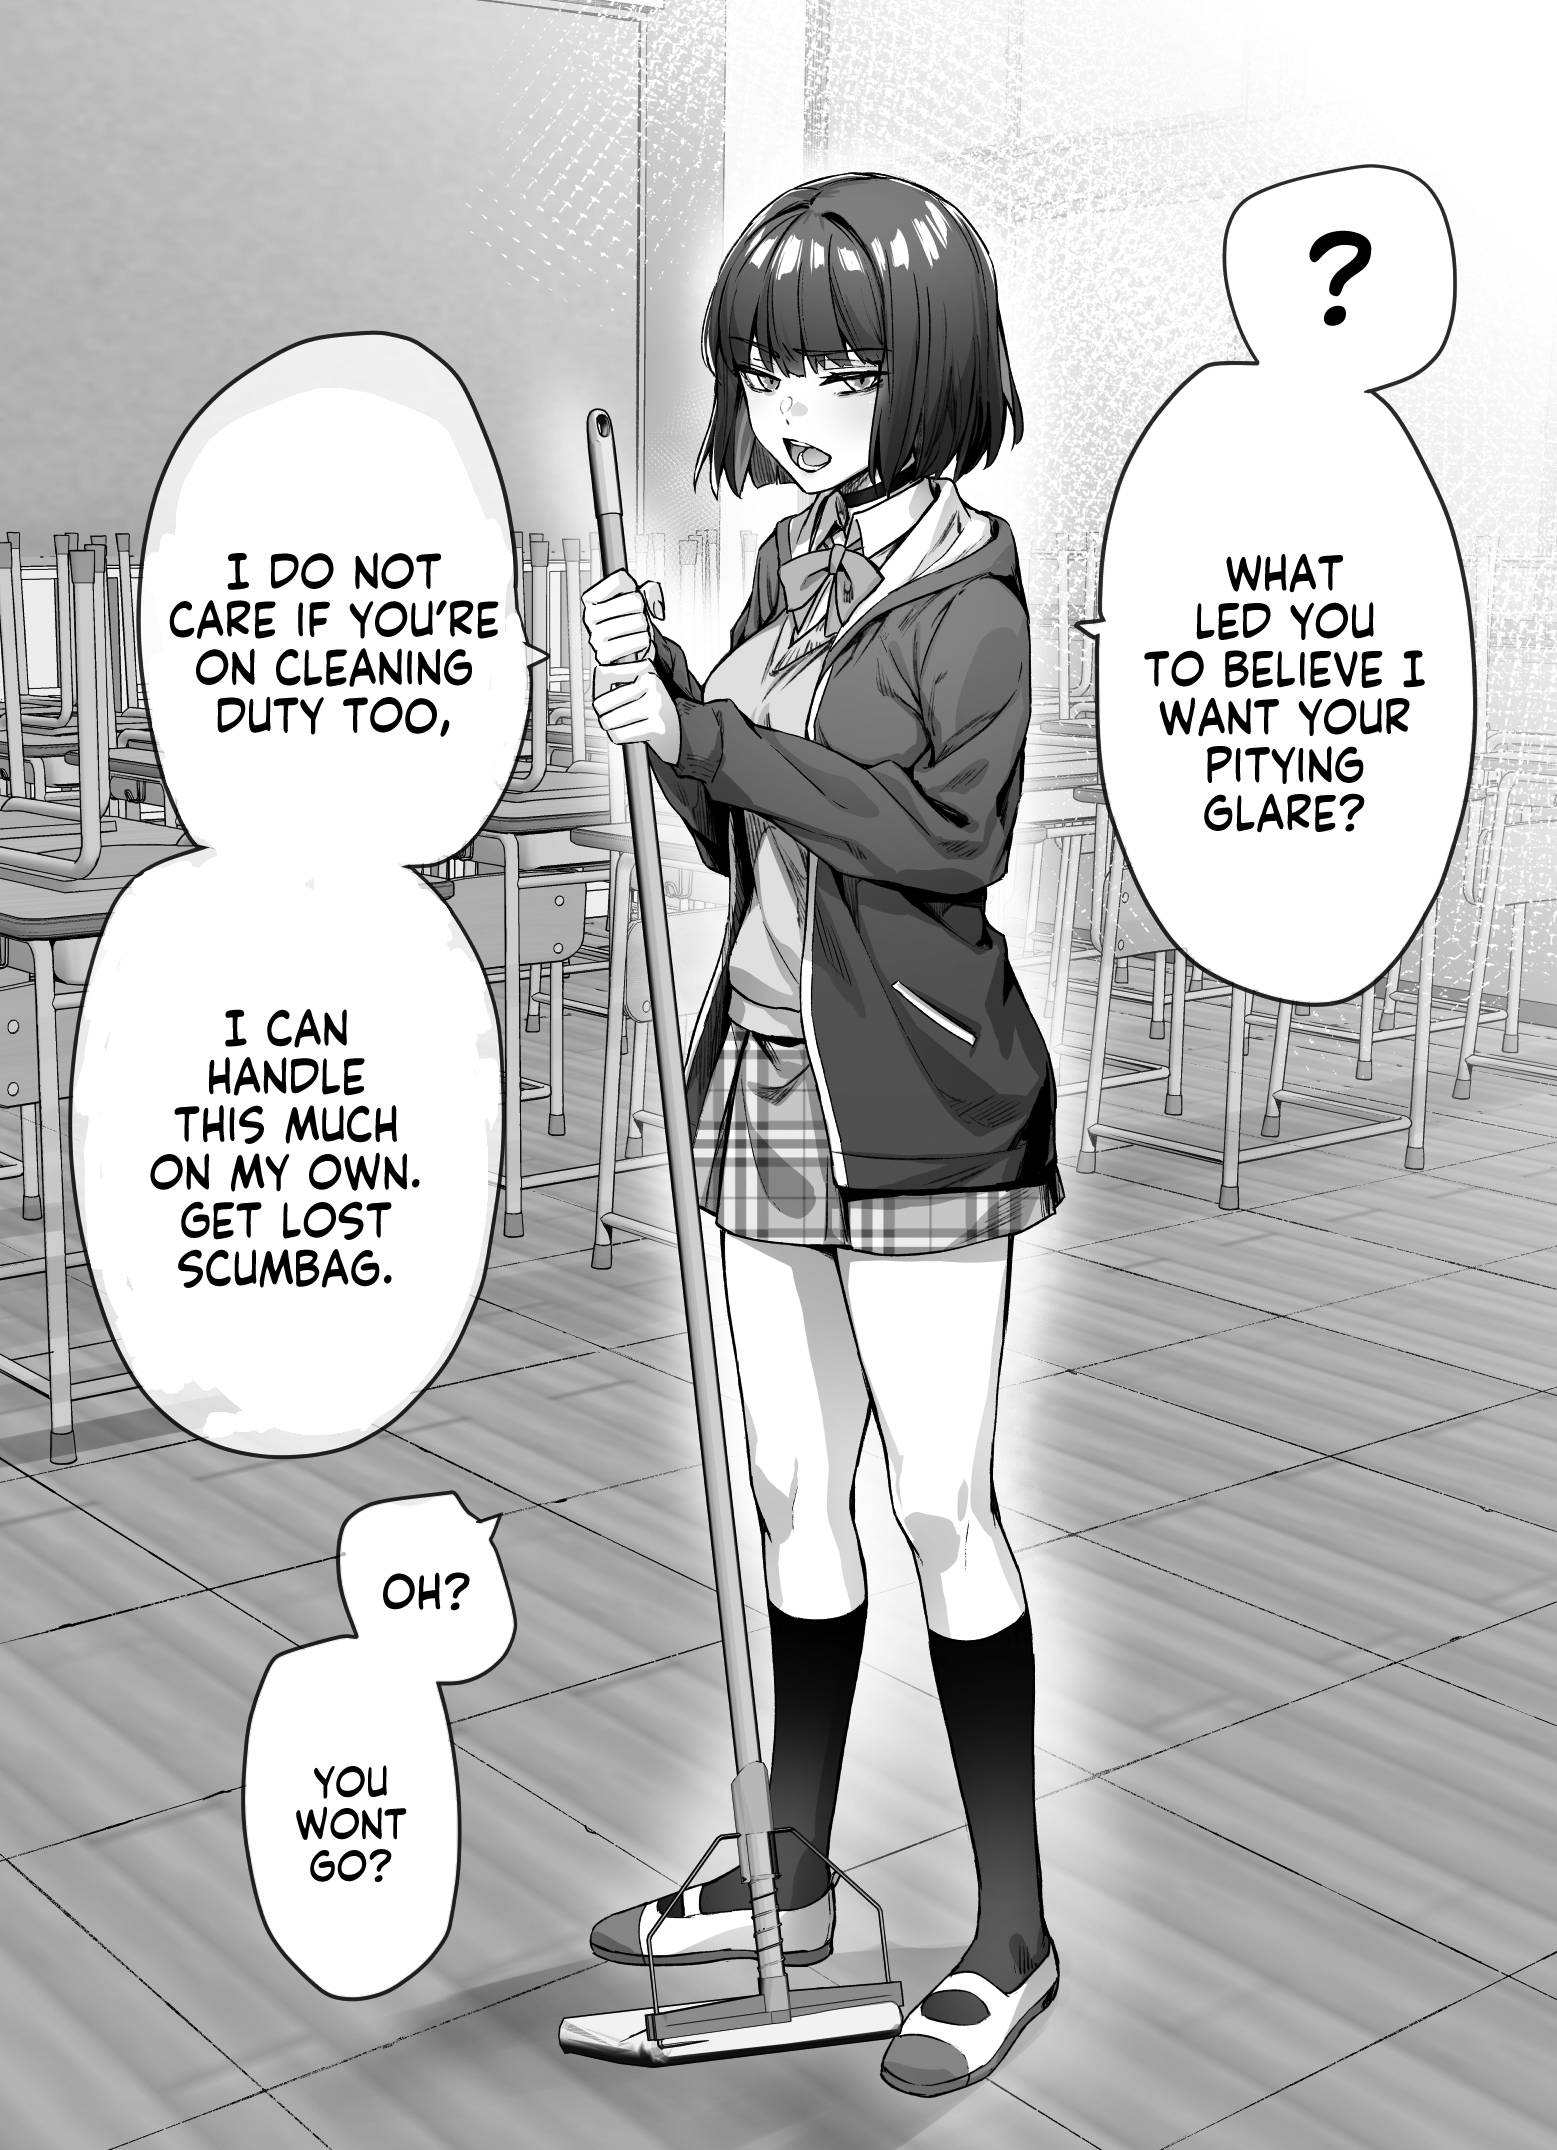 The Tsuntsuntsuntsuntsuntsuntsuntsuntsuntsuntsundere Girl Getting Less and Less Tsun Day by Day - chapter 5 - #1